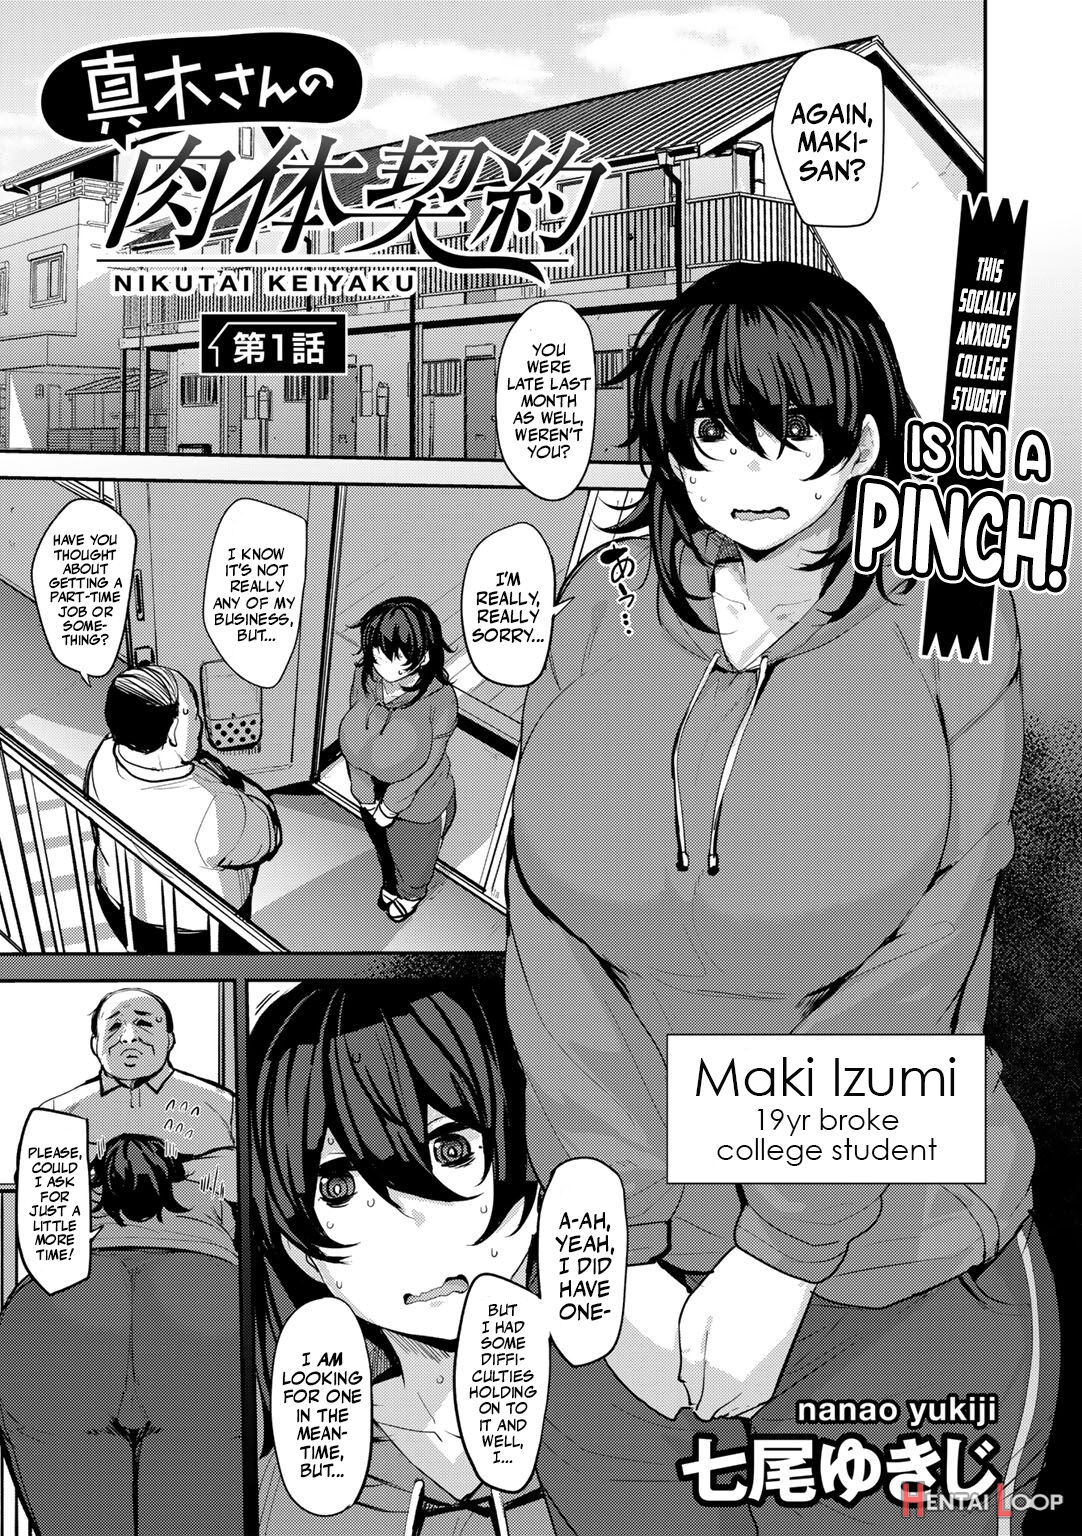 Maki's Coital Contract - Part 1 page 1